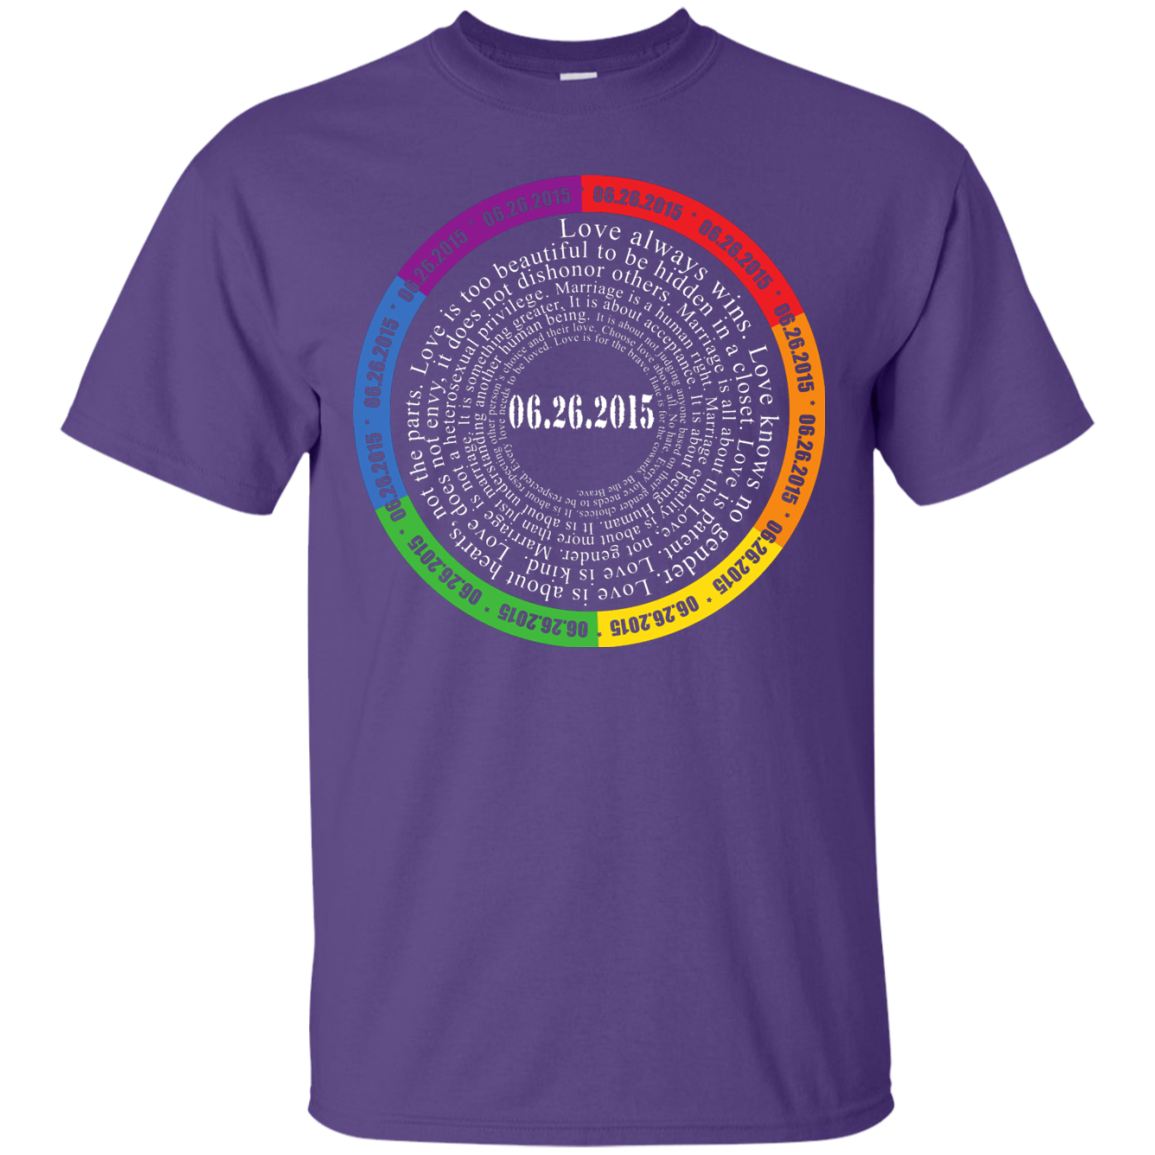 The "Pride Month" Special Shirt LGBT Pride purple shirt for Men